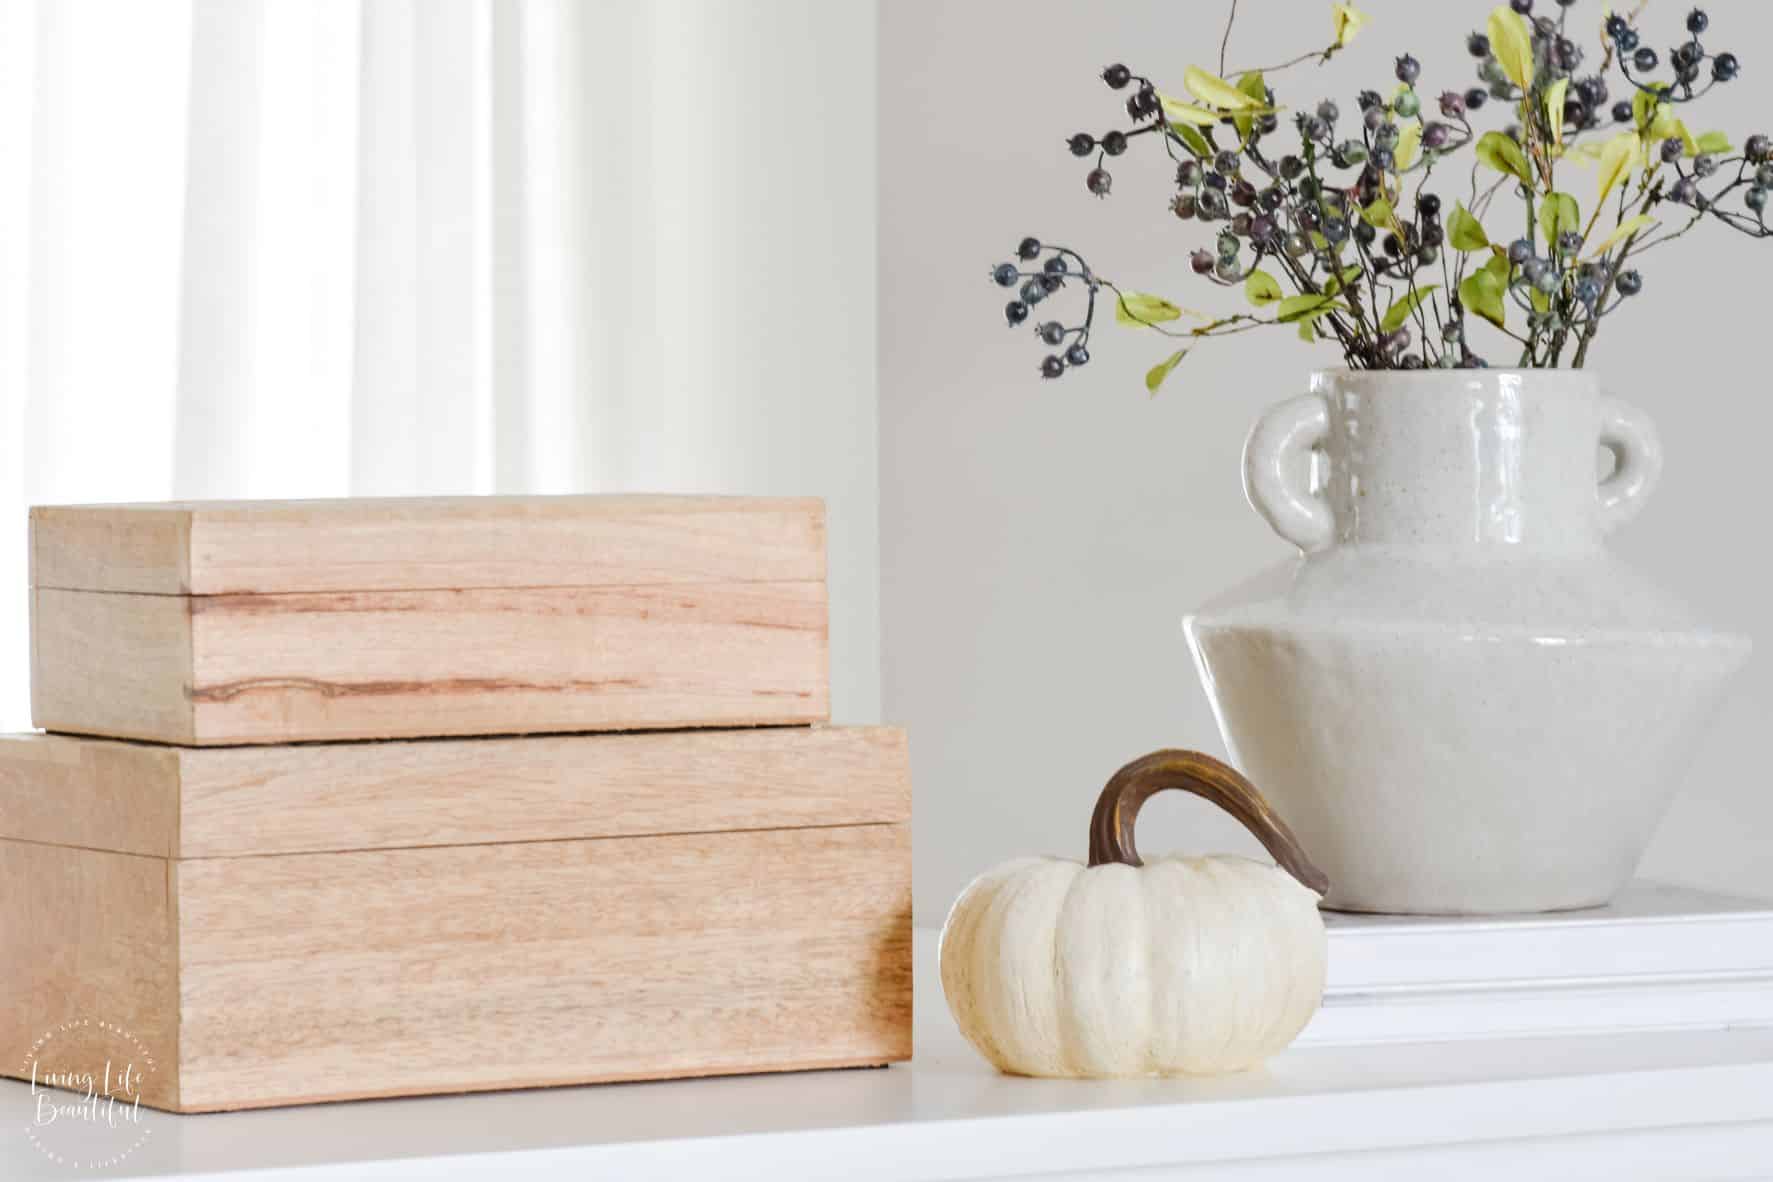 5 Cozy Fall Decorating Ideas to Help You Embrace the Season